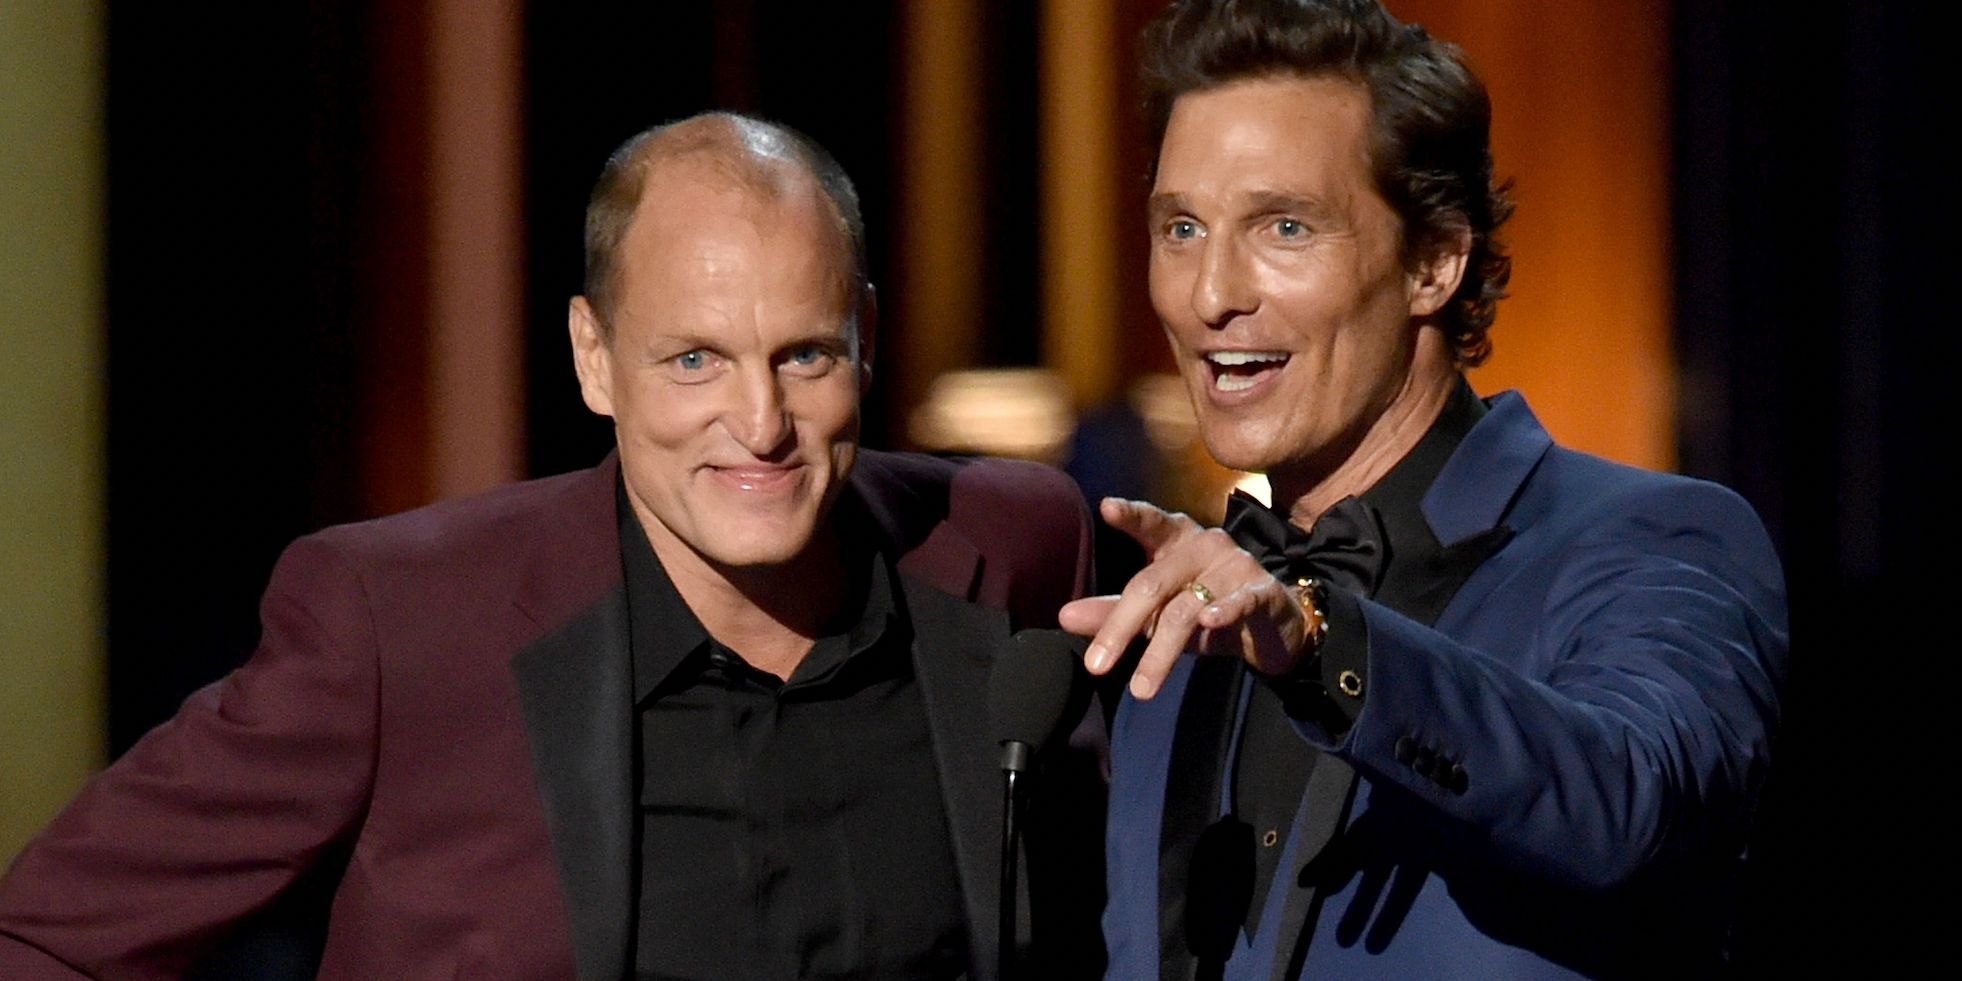 Woody Harrelson and Matthew Mcconaughey on stage together. 